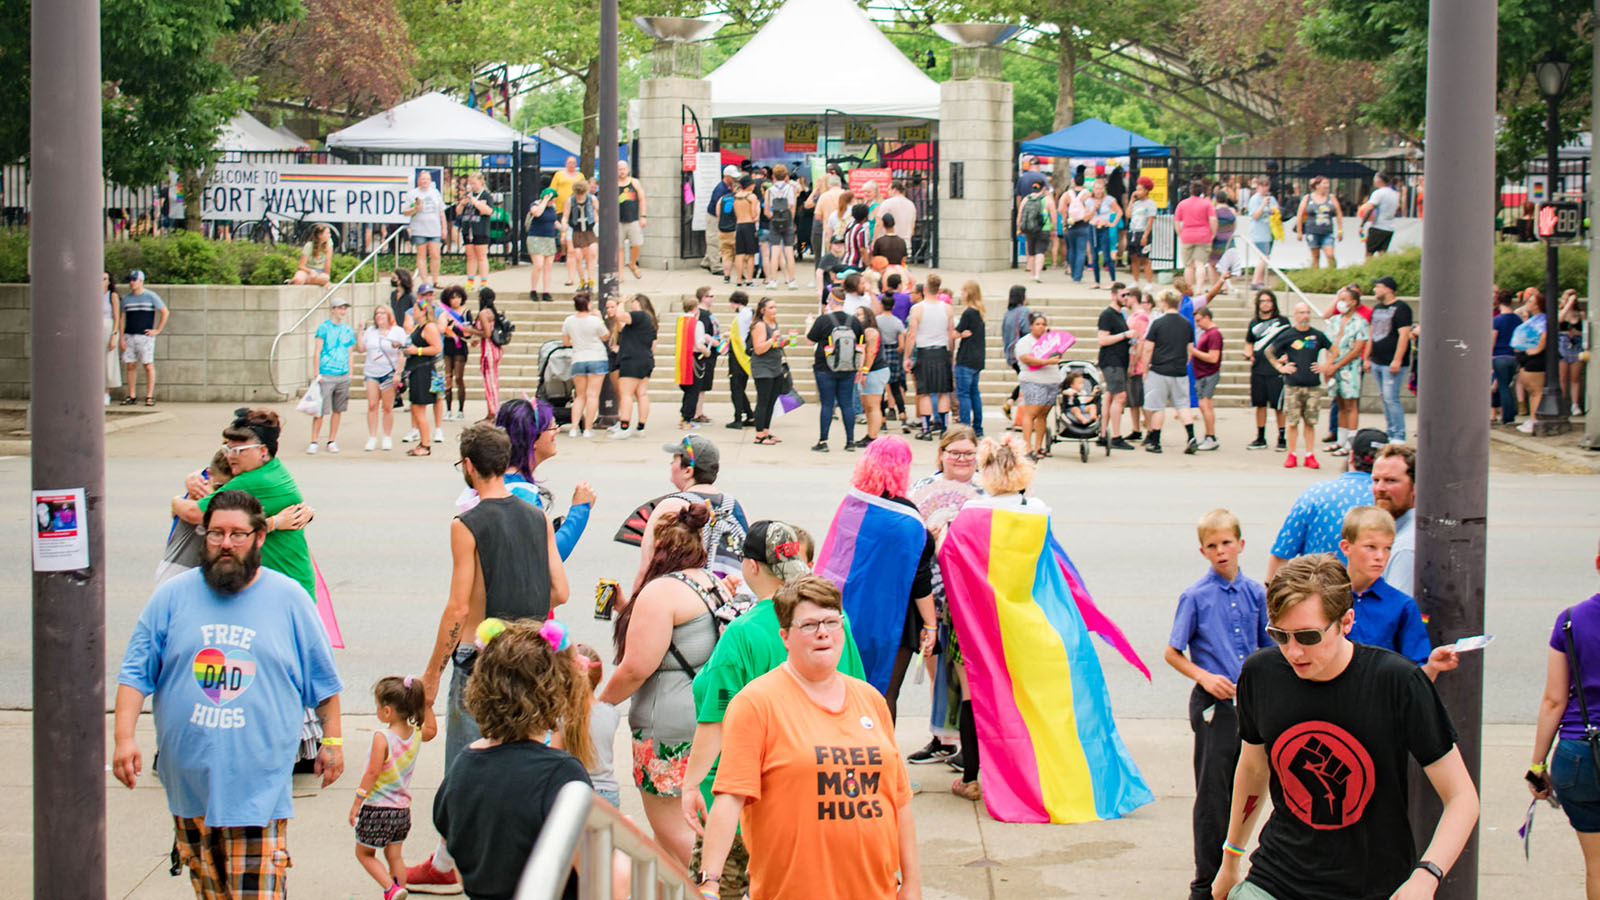 Show your true colors at Fort Wayne Pride — Whatzup